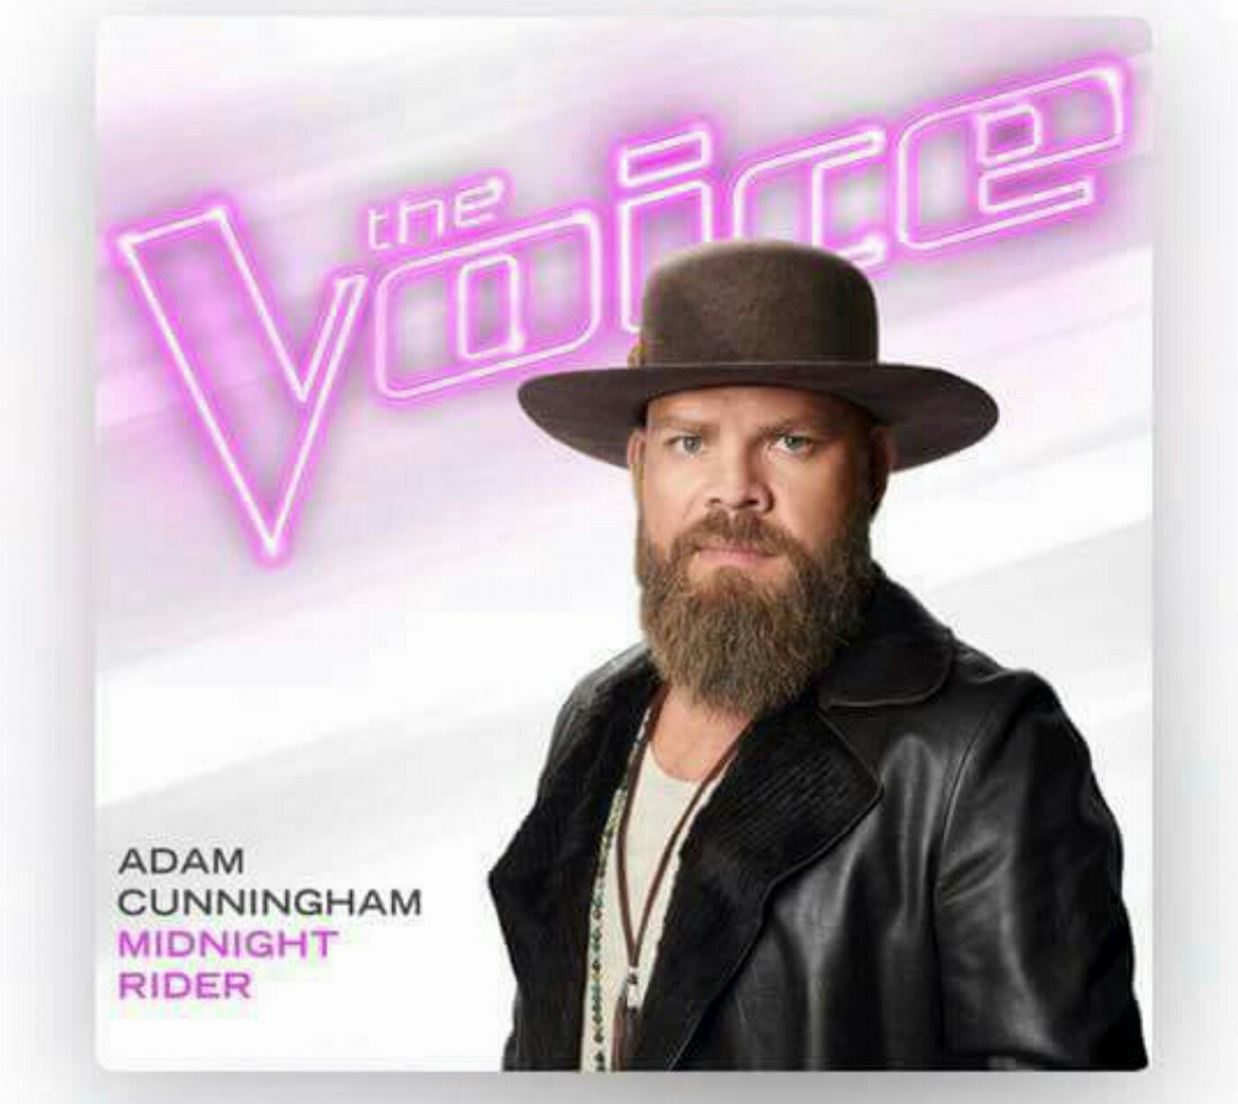 Celebrating with The Voice’s Adam Cunningham